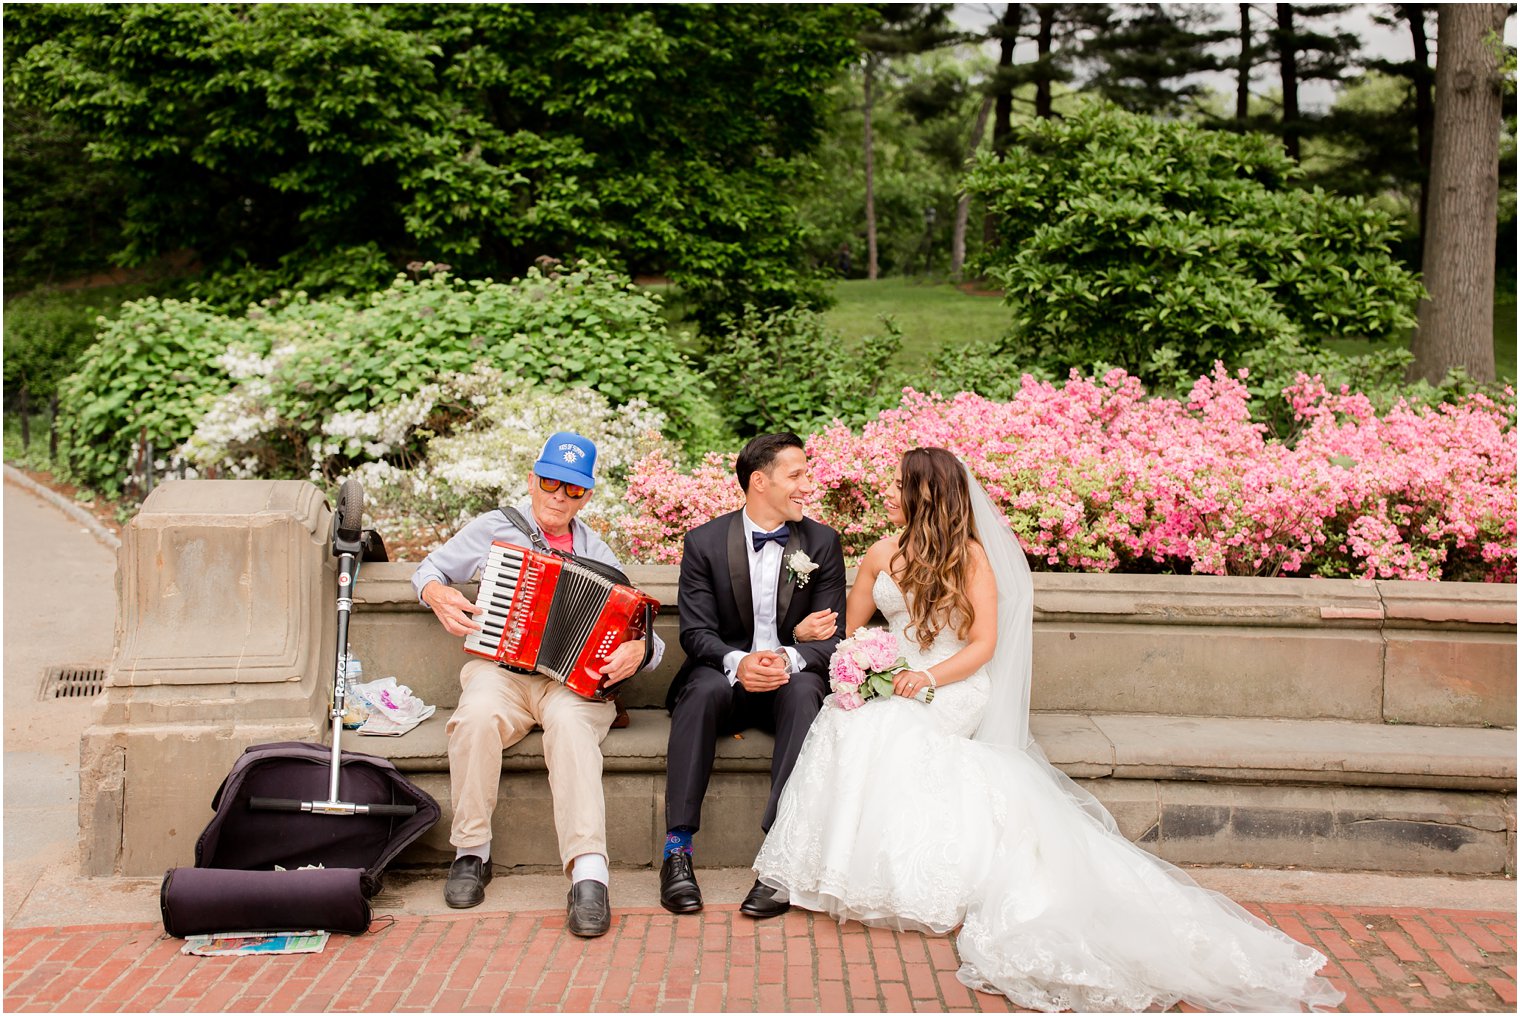 Bride and groom with musician in Central Park | Photo by Idalia Photography